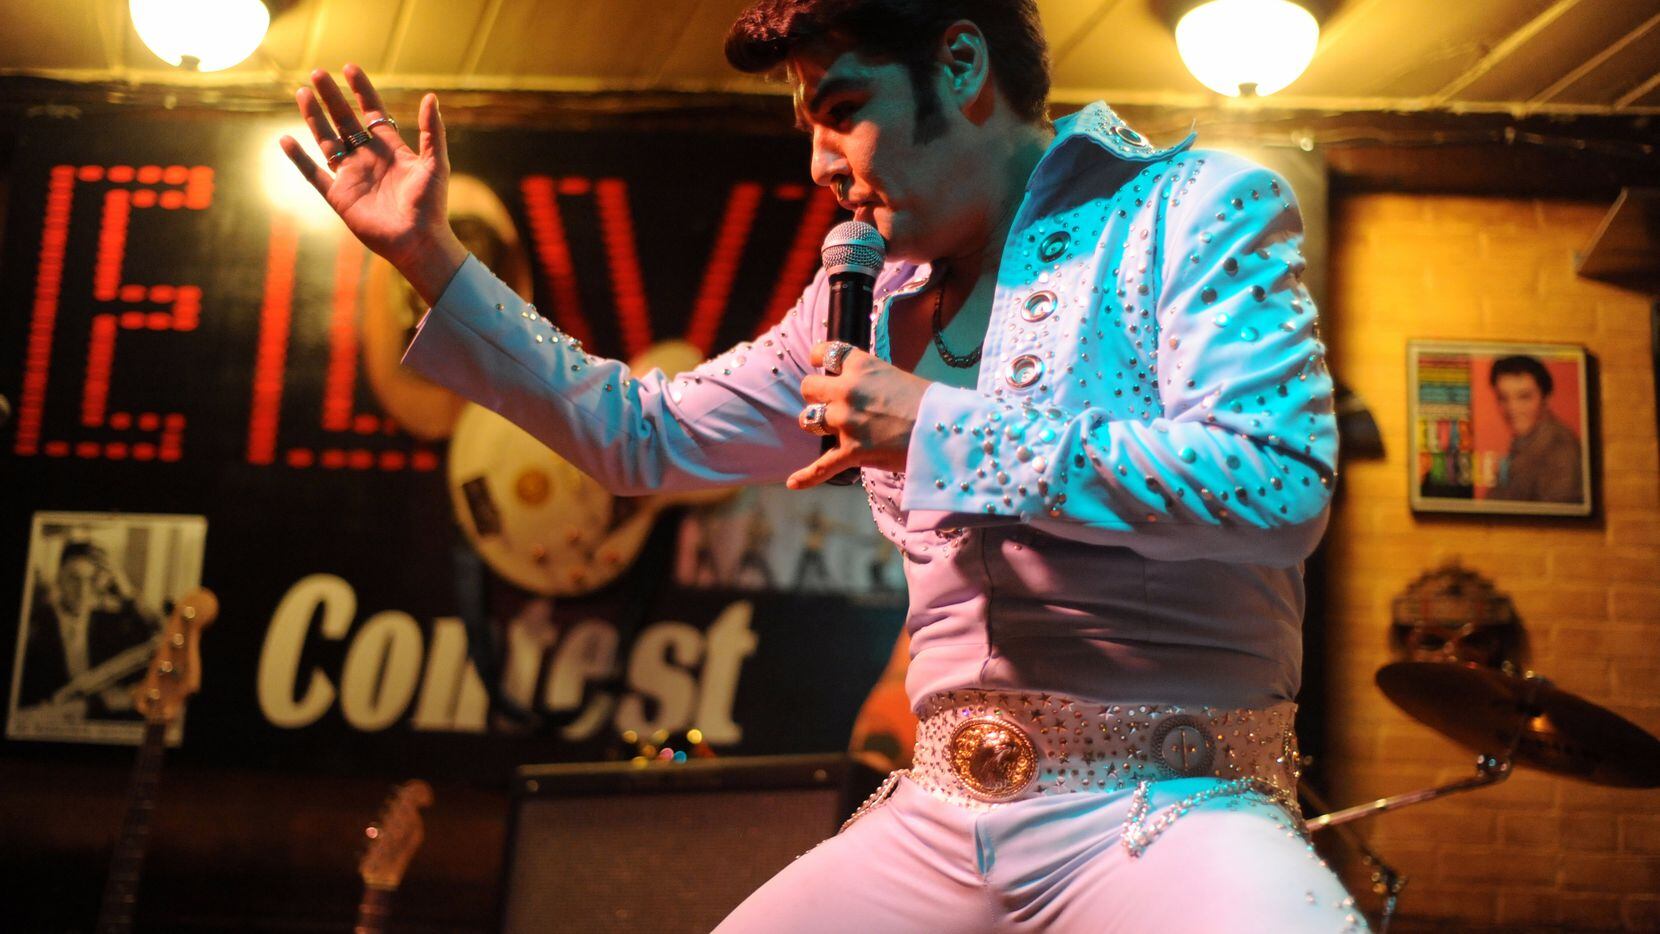 In a 2014 file photo, Pablo wins first place in the Elvis impersonation contest at El Ranchito in Dallas.